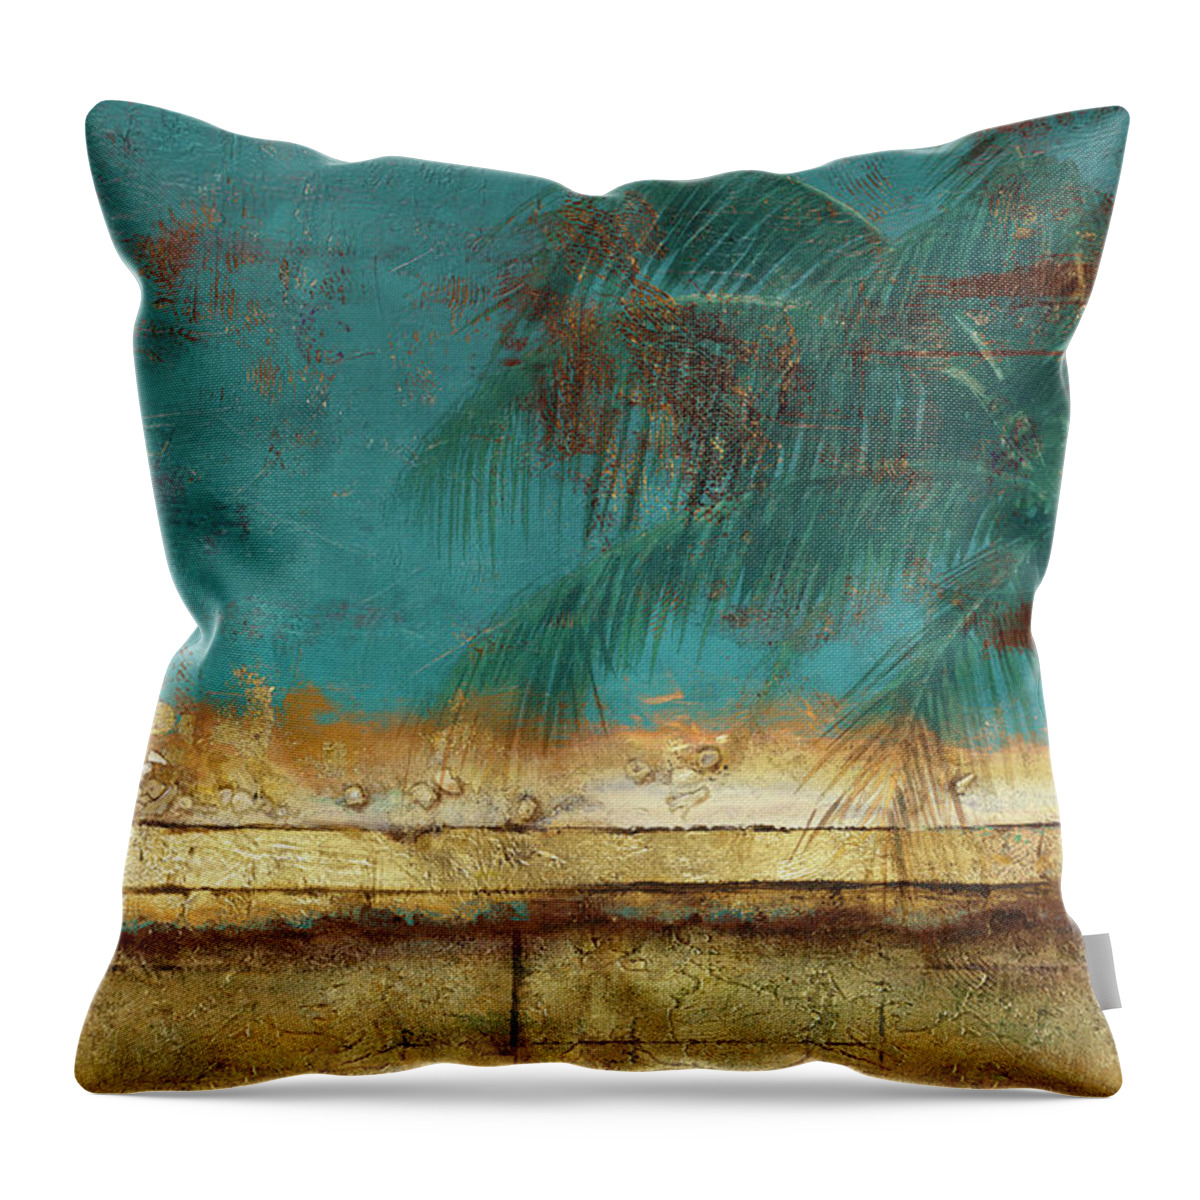 Sea Throw Pillow featuring the mixed media Sea Landscapes by Patricia Pinto